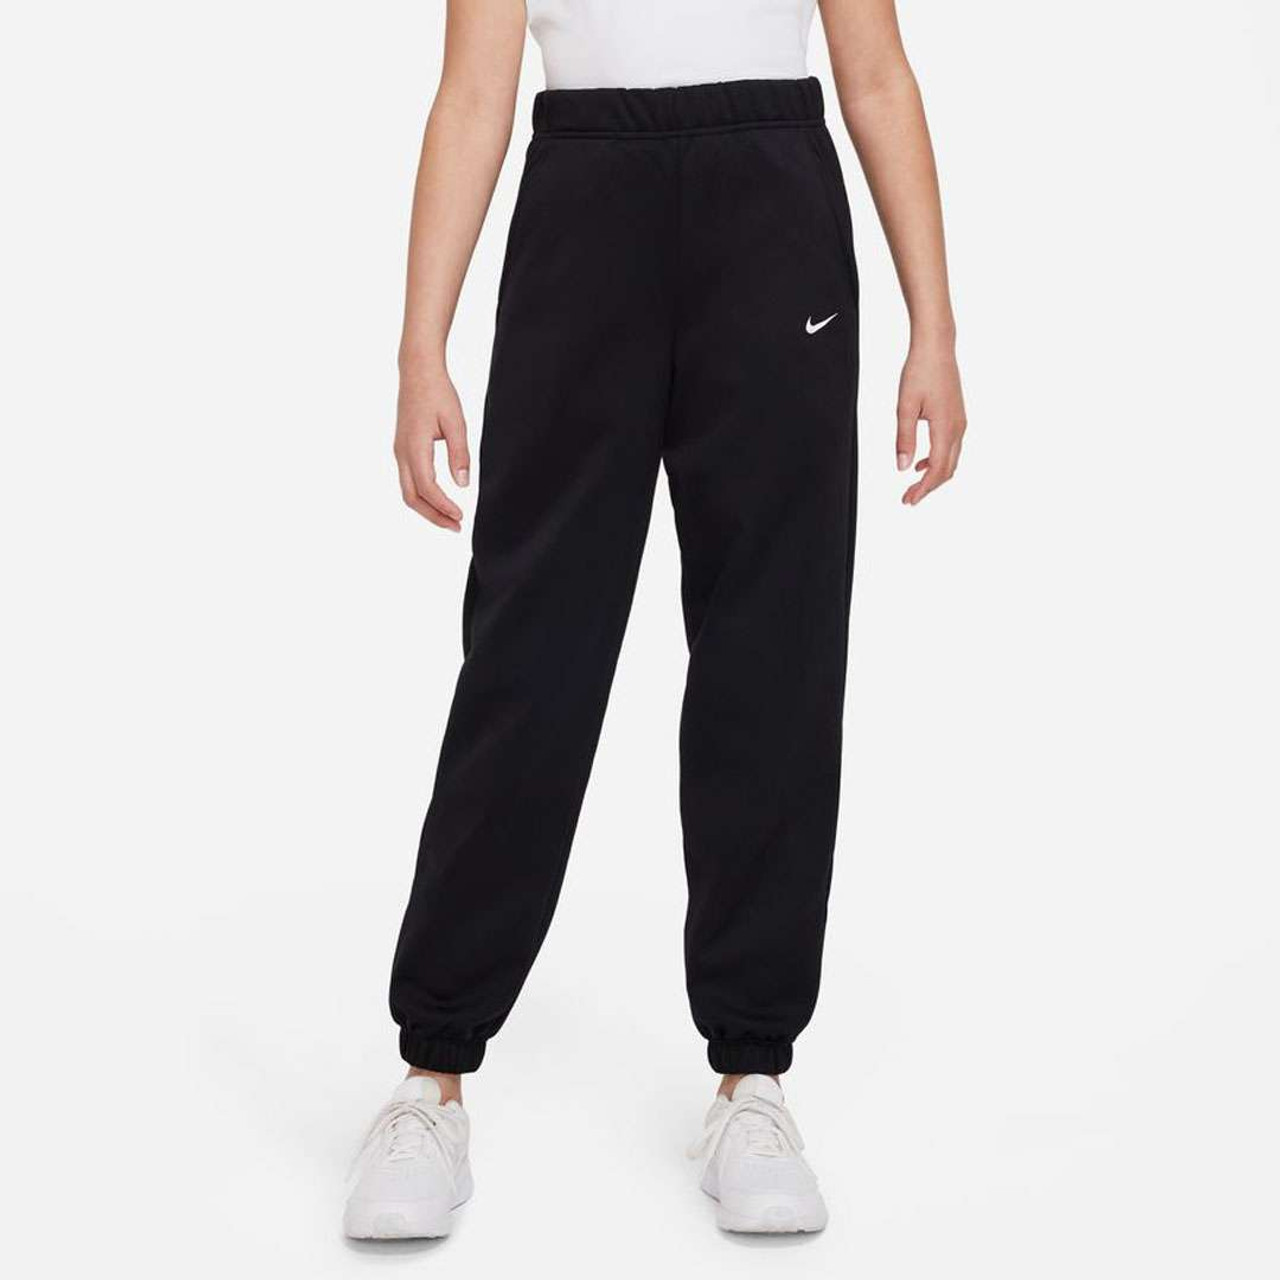 https://cdn11.bigcommerce.com/s-ppsyskcavg/images/stencil/1280x1280/products/62527/212940/Girls-Therma-FIT-Cuffed-Sweatpants_212843__52236.1669161650.jpg?c=2